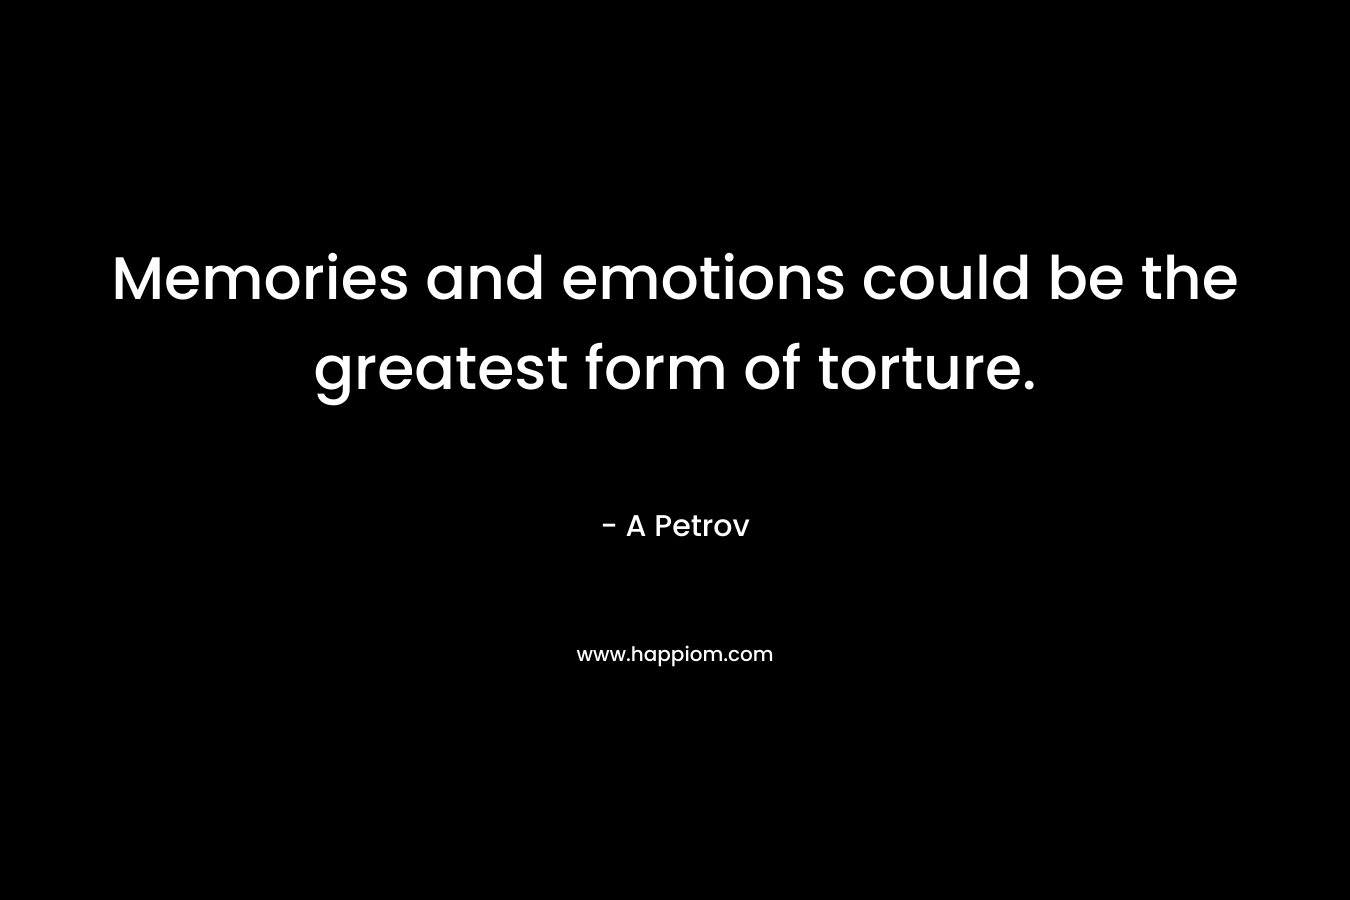 Memories and emotions could be the greatest form of torture. – A Petrov